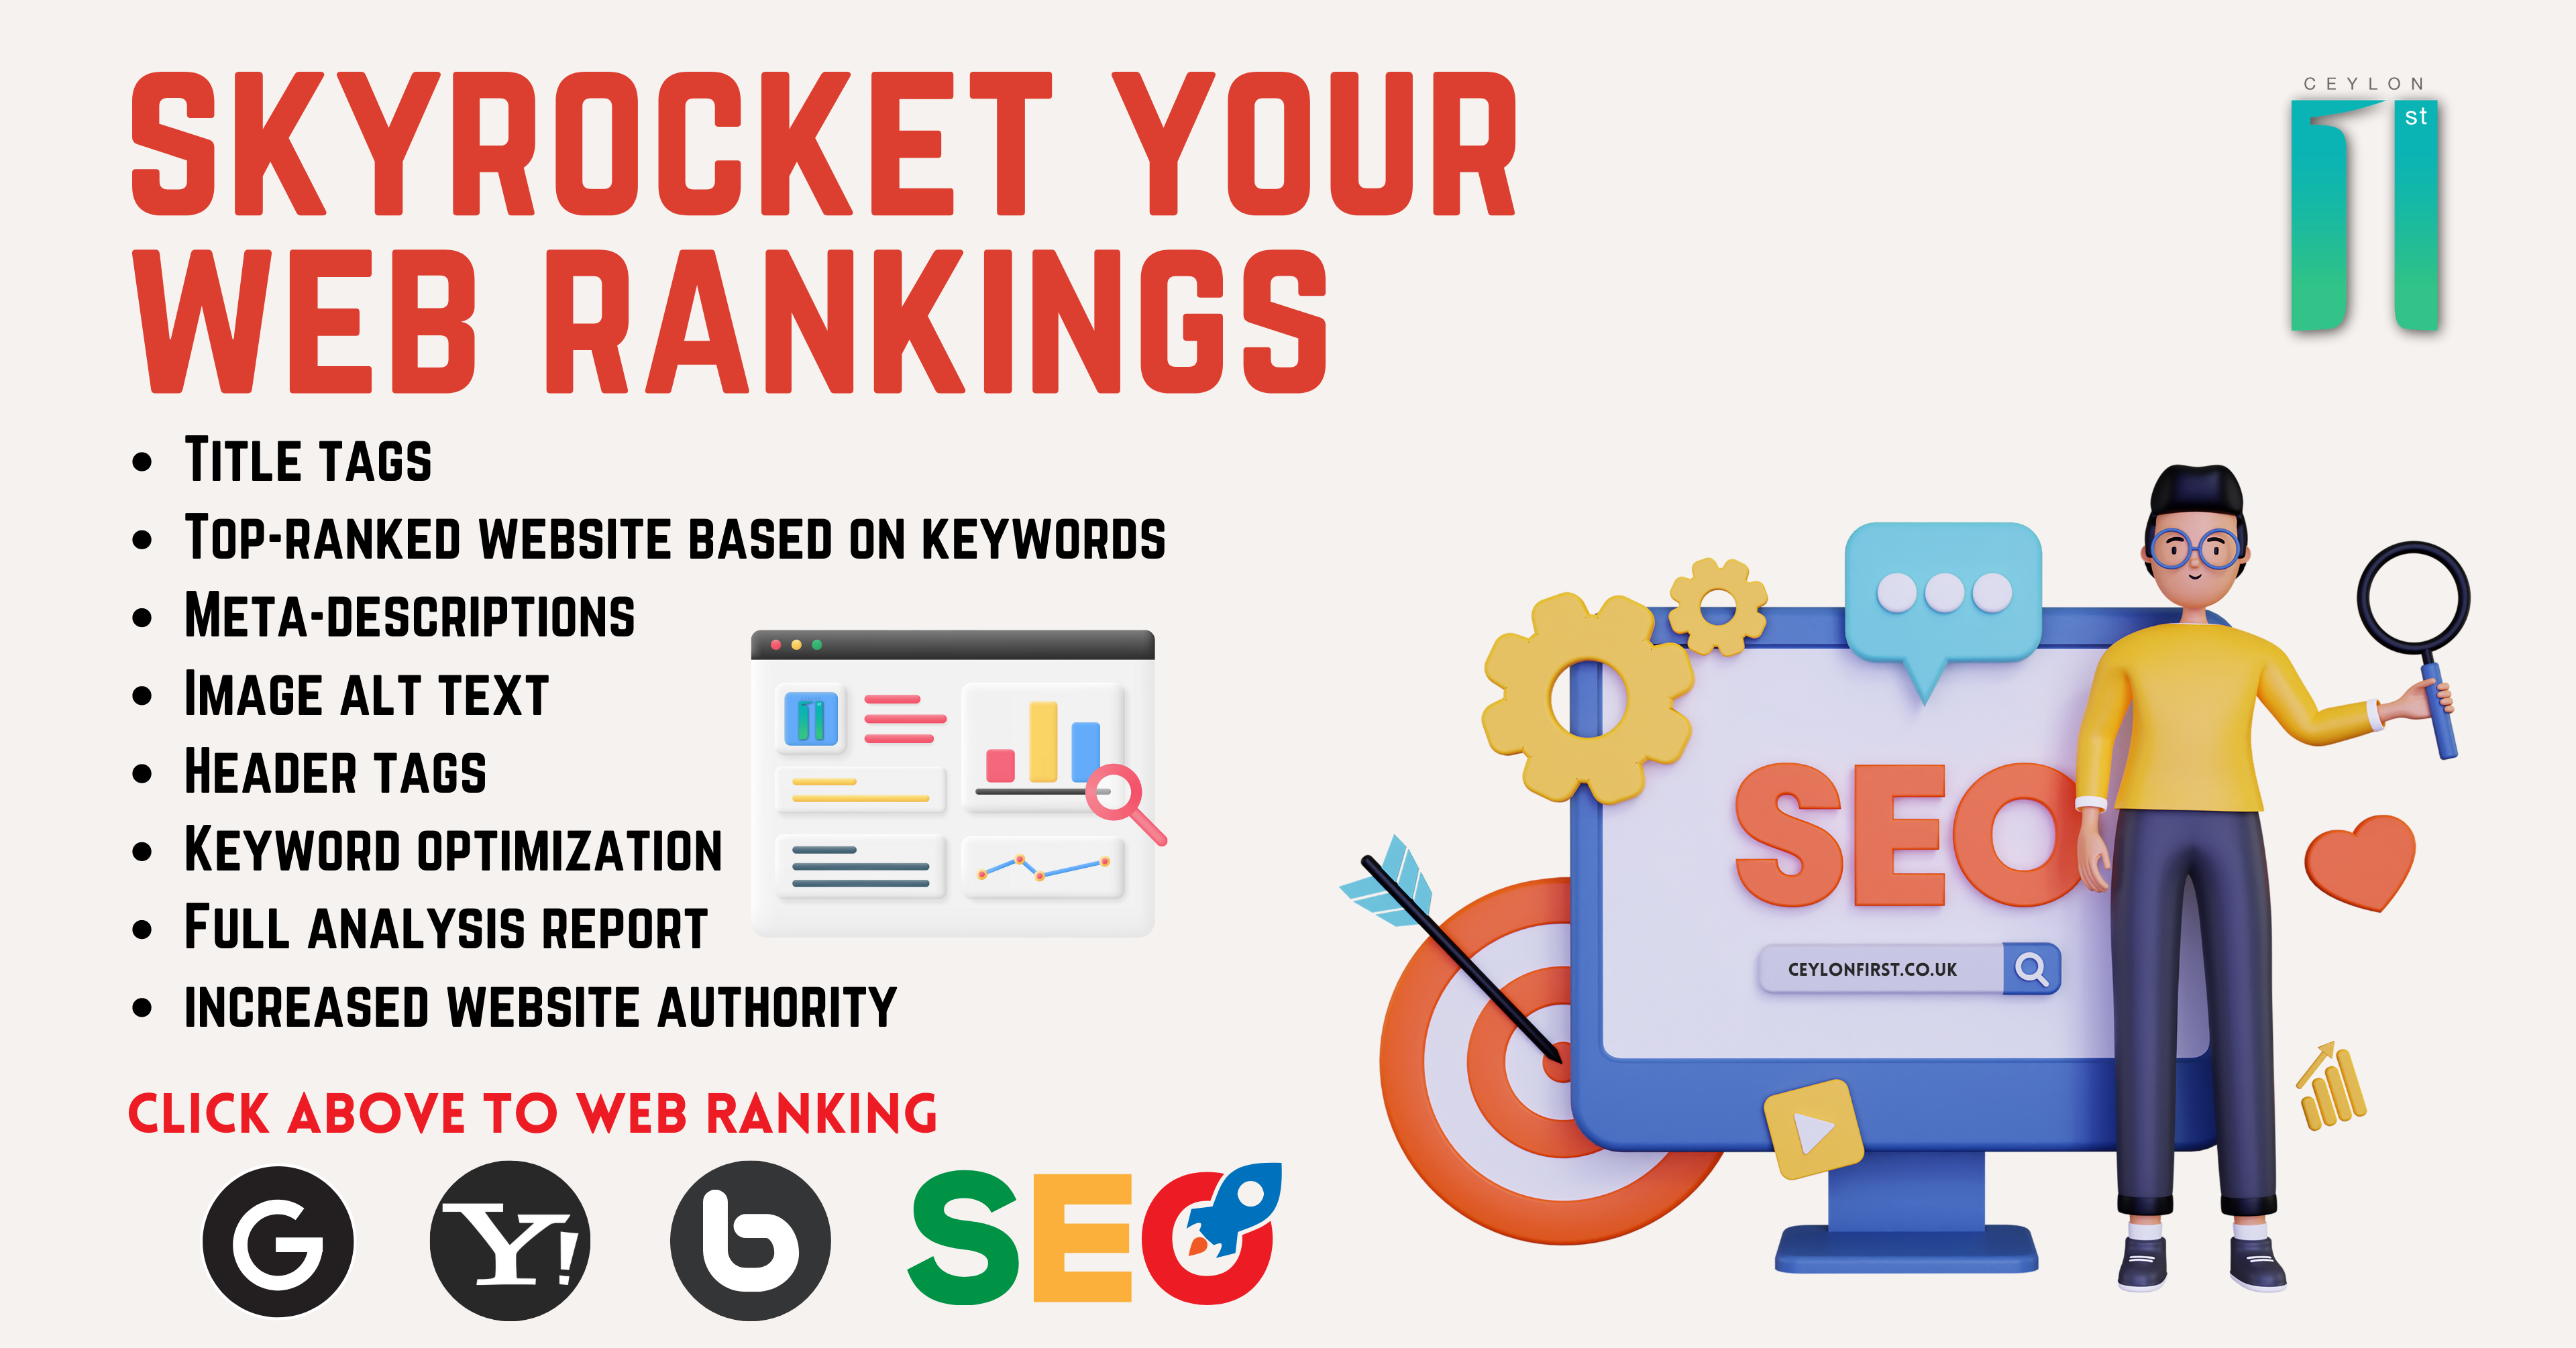 Best Tactics To Gain Better Organic Search Engine Rankings | SEO | Advertising